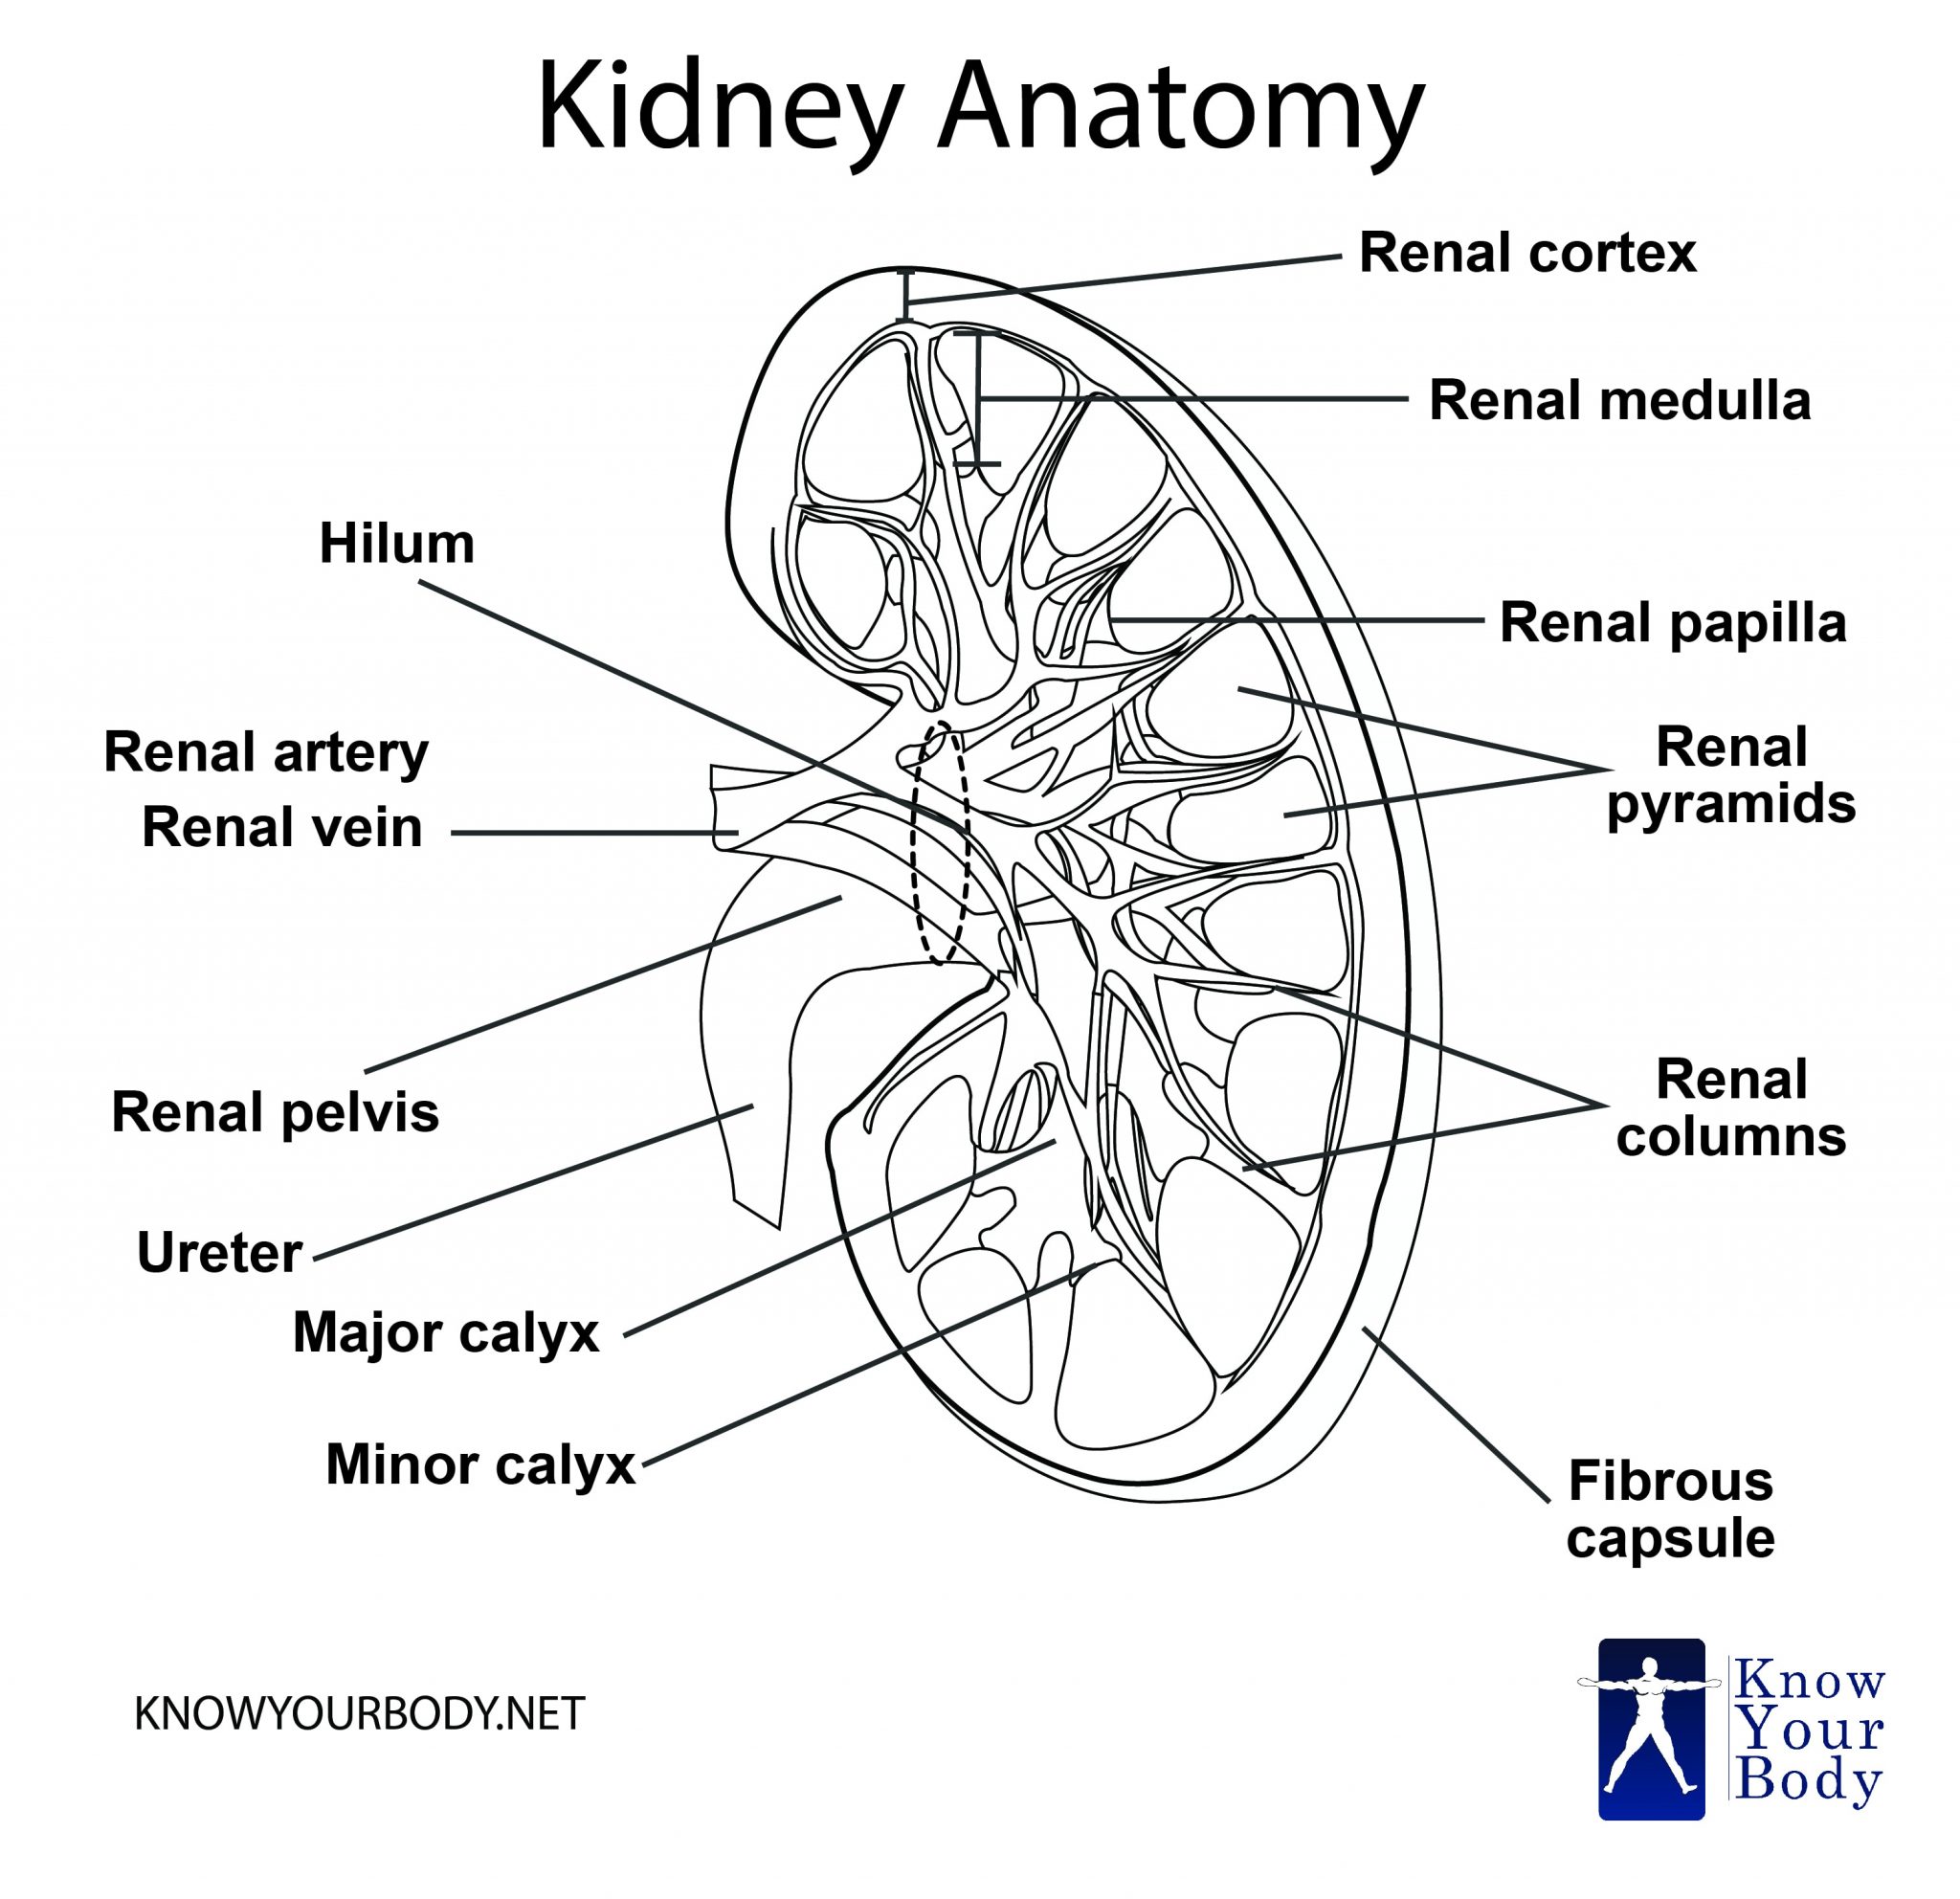 Kidney - Location, Function, Anatomy, Diagram and FAQs